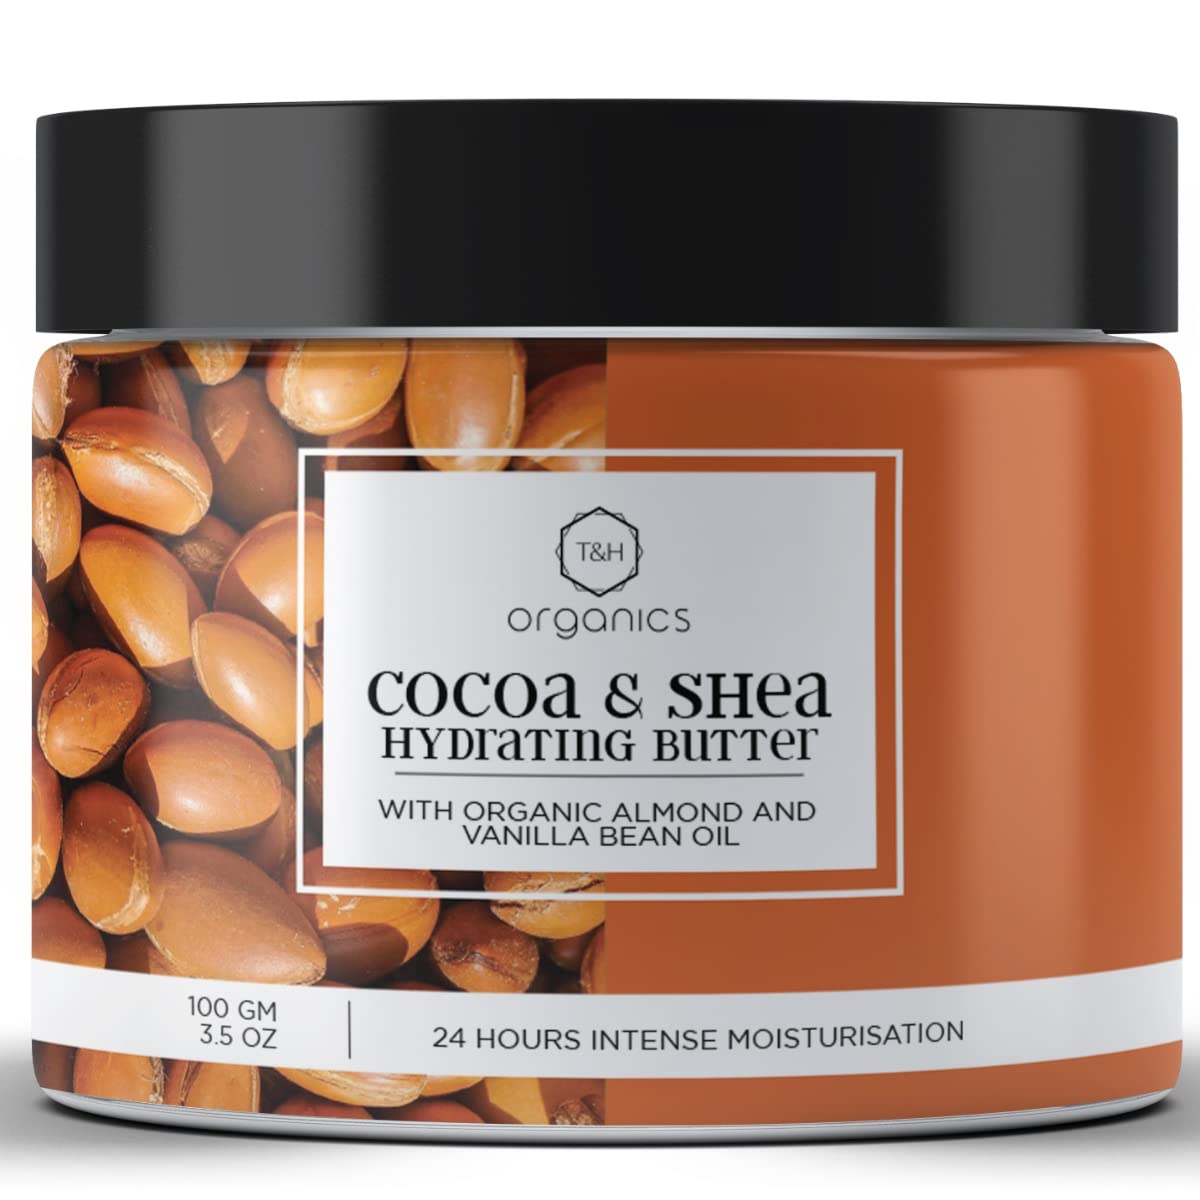 T&H Organics Cocoa and Shea Hydrating Butter with Organic Almond and Vanilla Bean Oil,100 gm